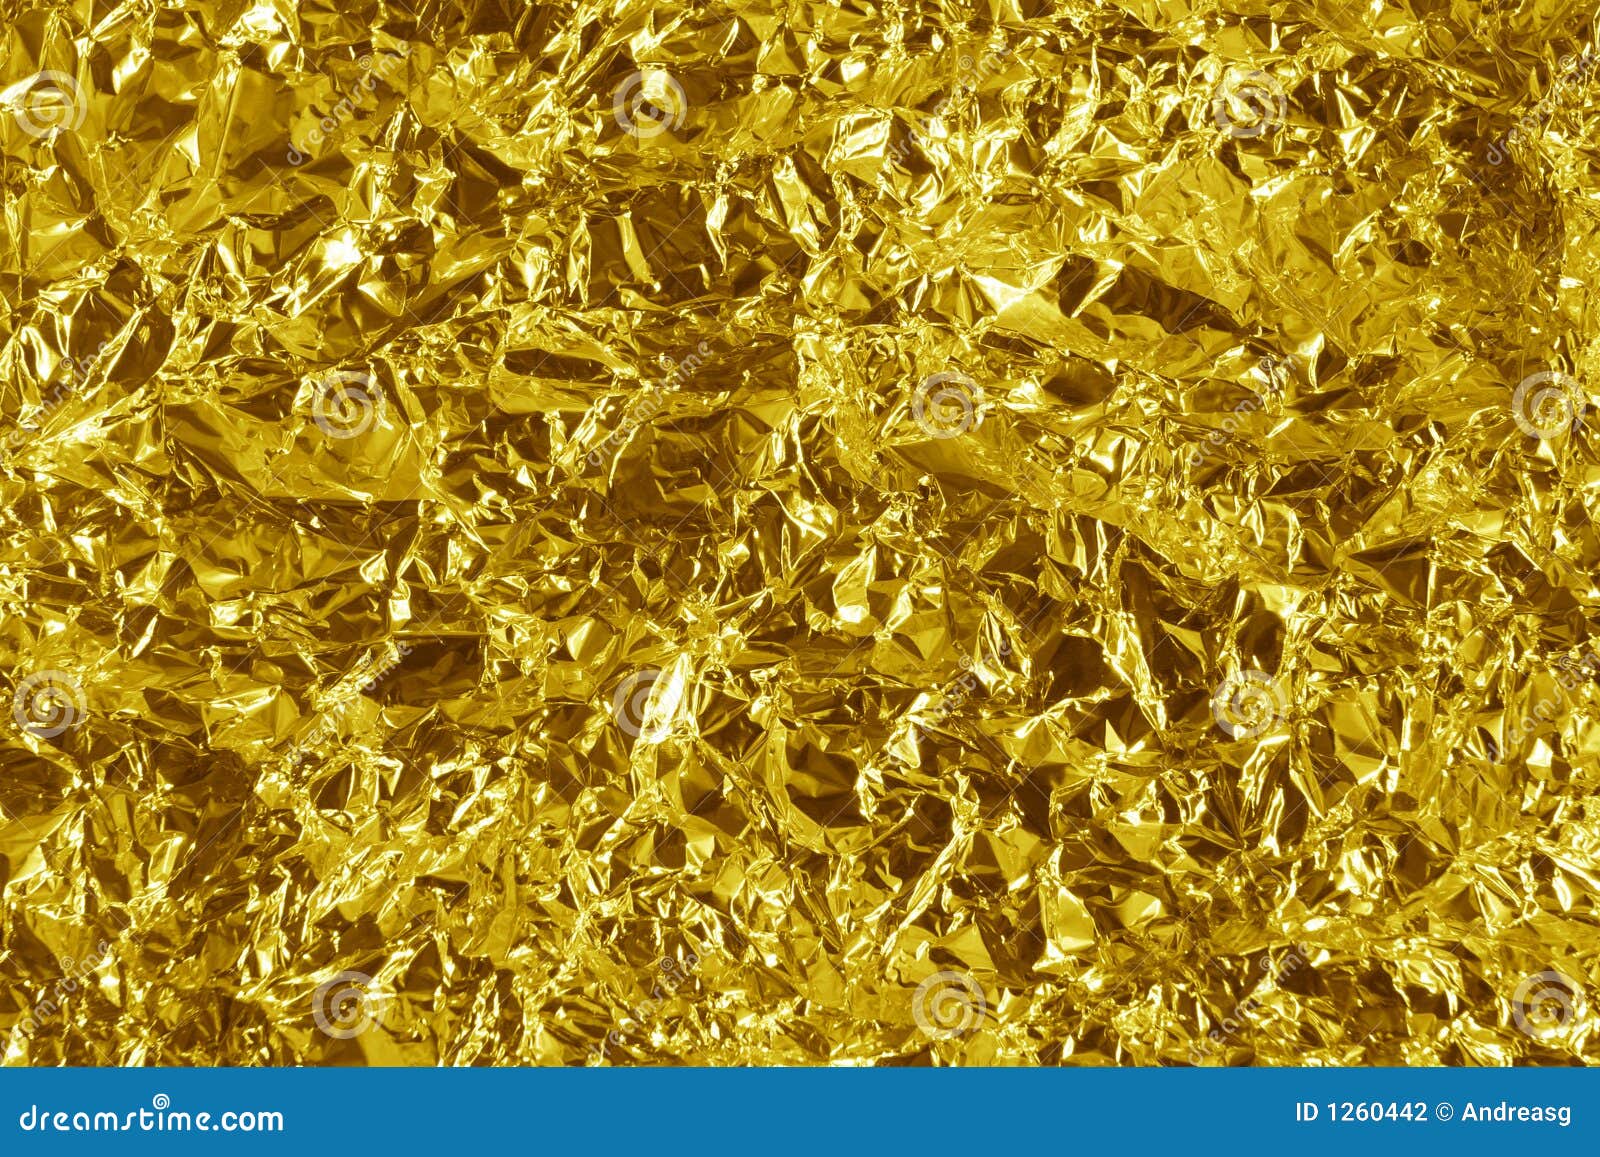 Crumpled Gold Metal Stock Photography - Image: 1260442